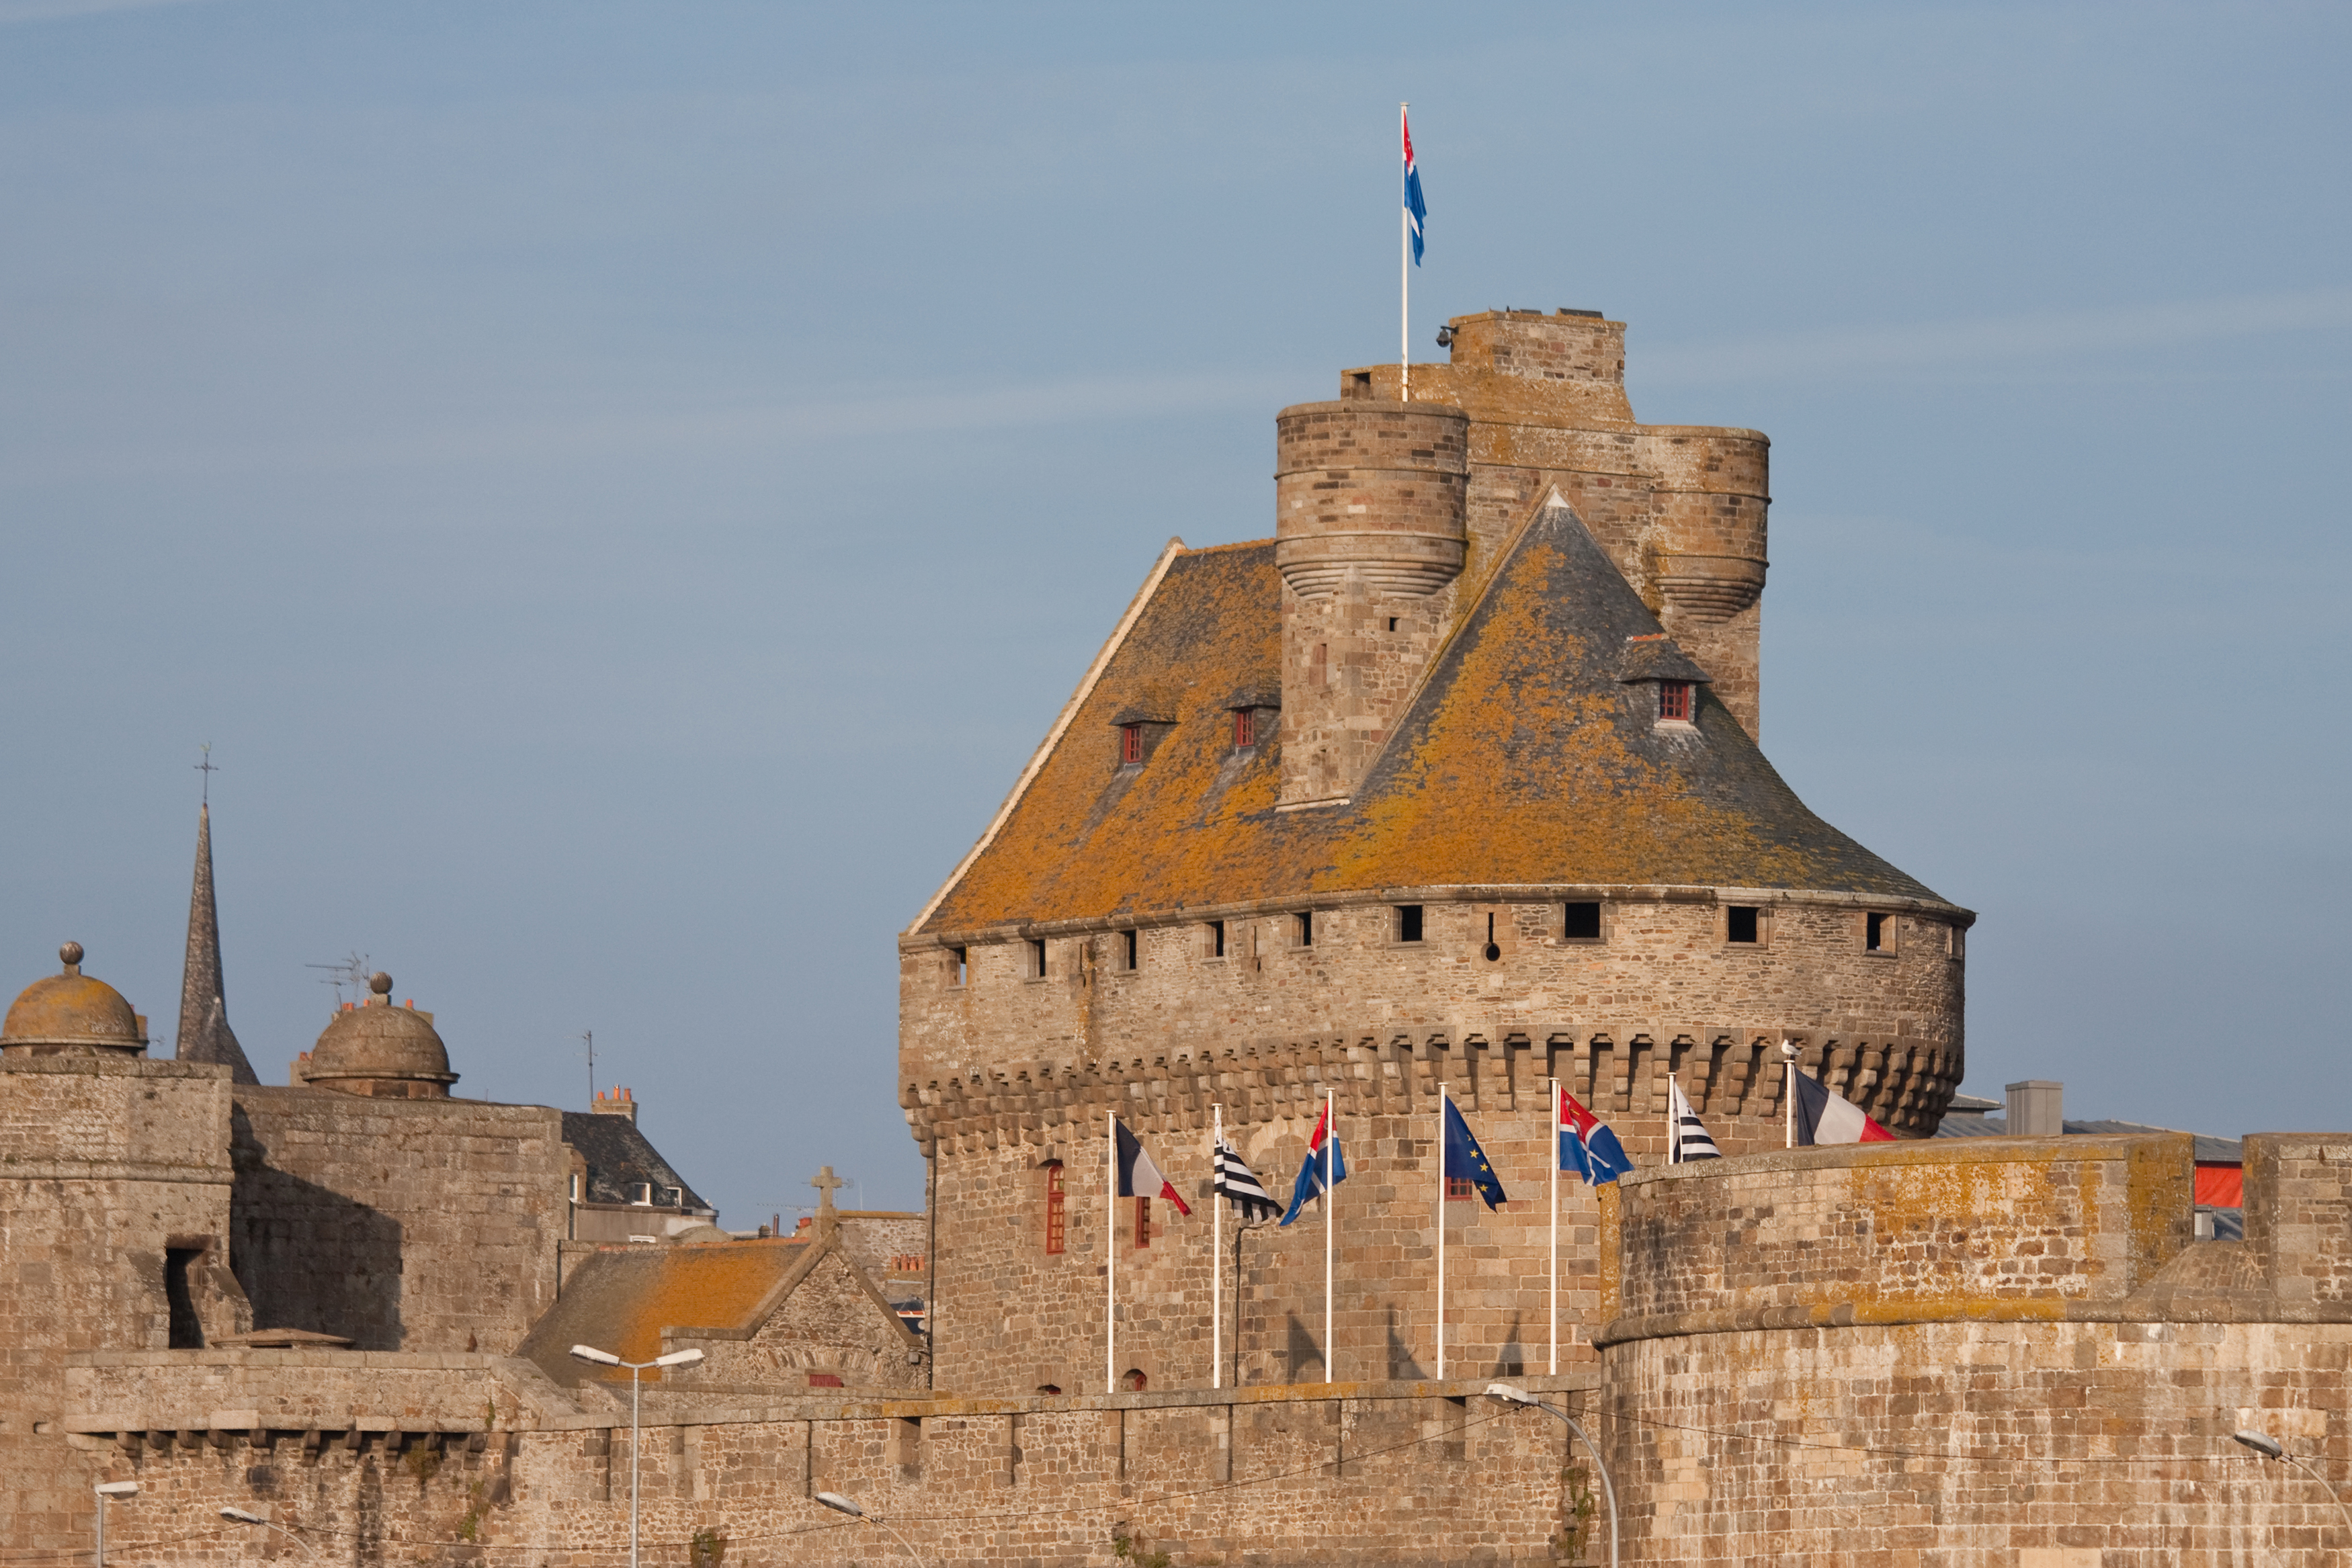 The castle of the fortified city of Saint-Malo, Brittany, France.